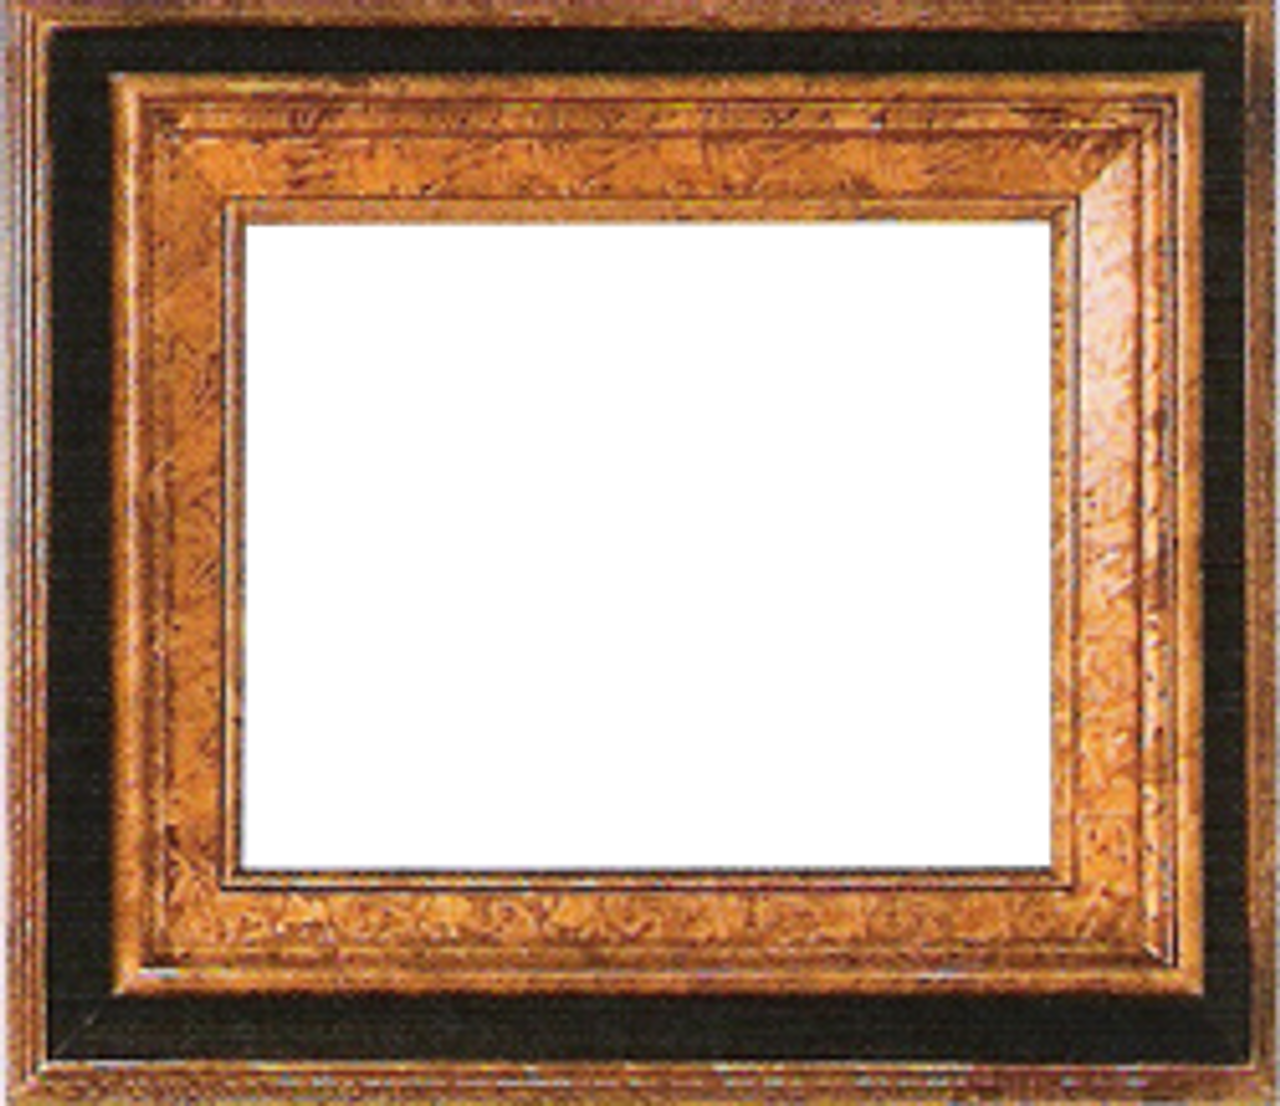 3 Inch Econo Wood Frames With Wood Liners: 24X24*